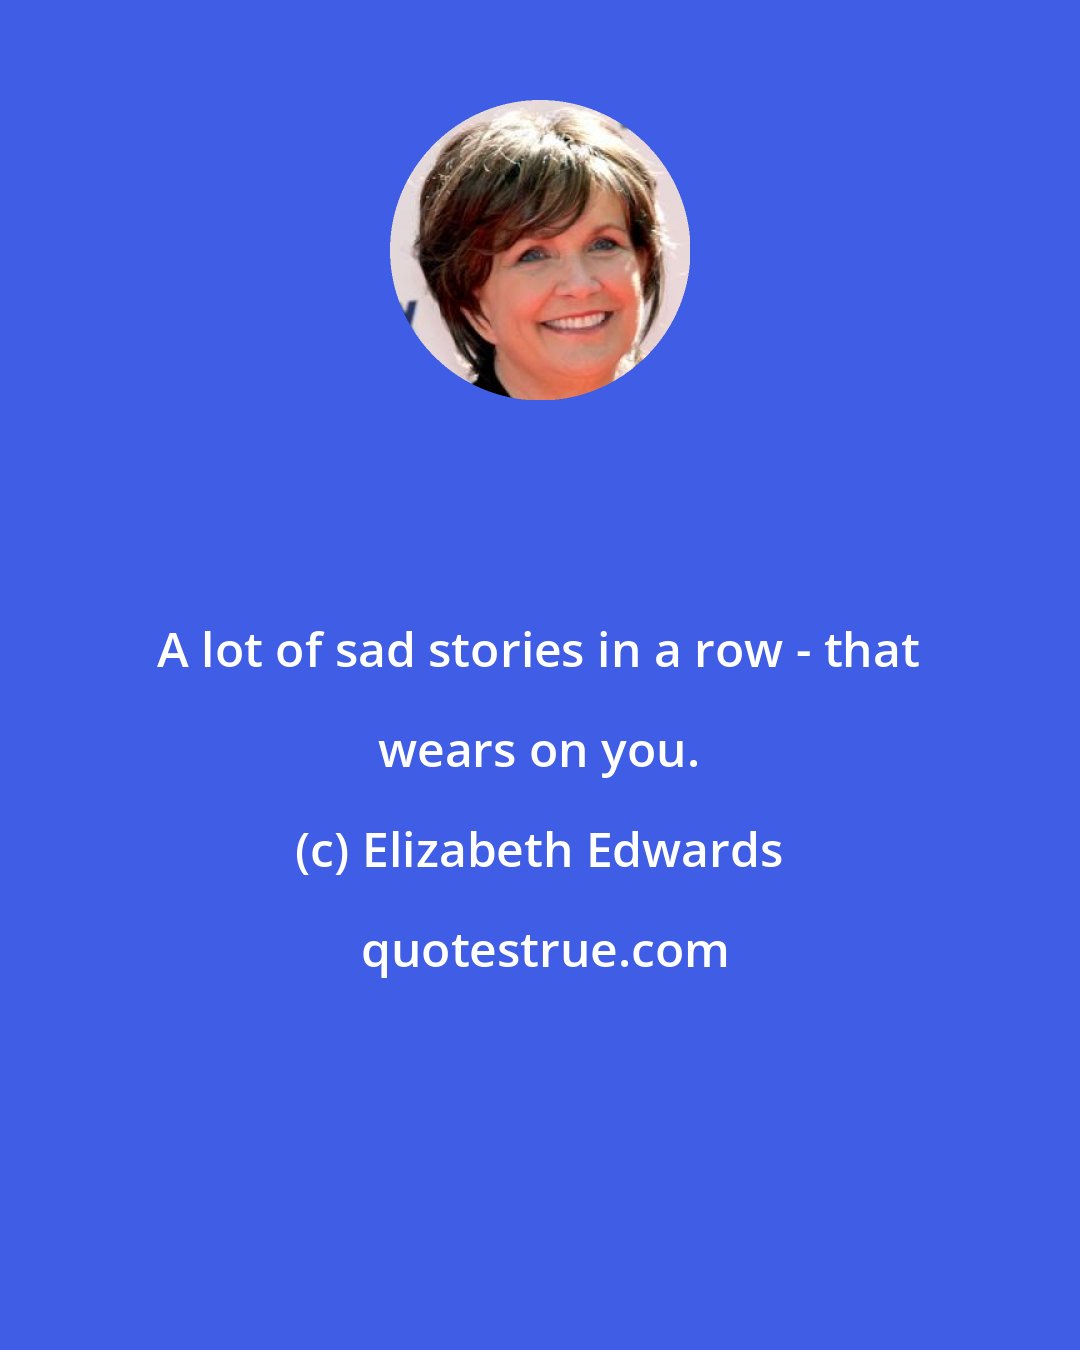 Elizabeth Edwards: A lot of sad stories in a row - that wears on you.